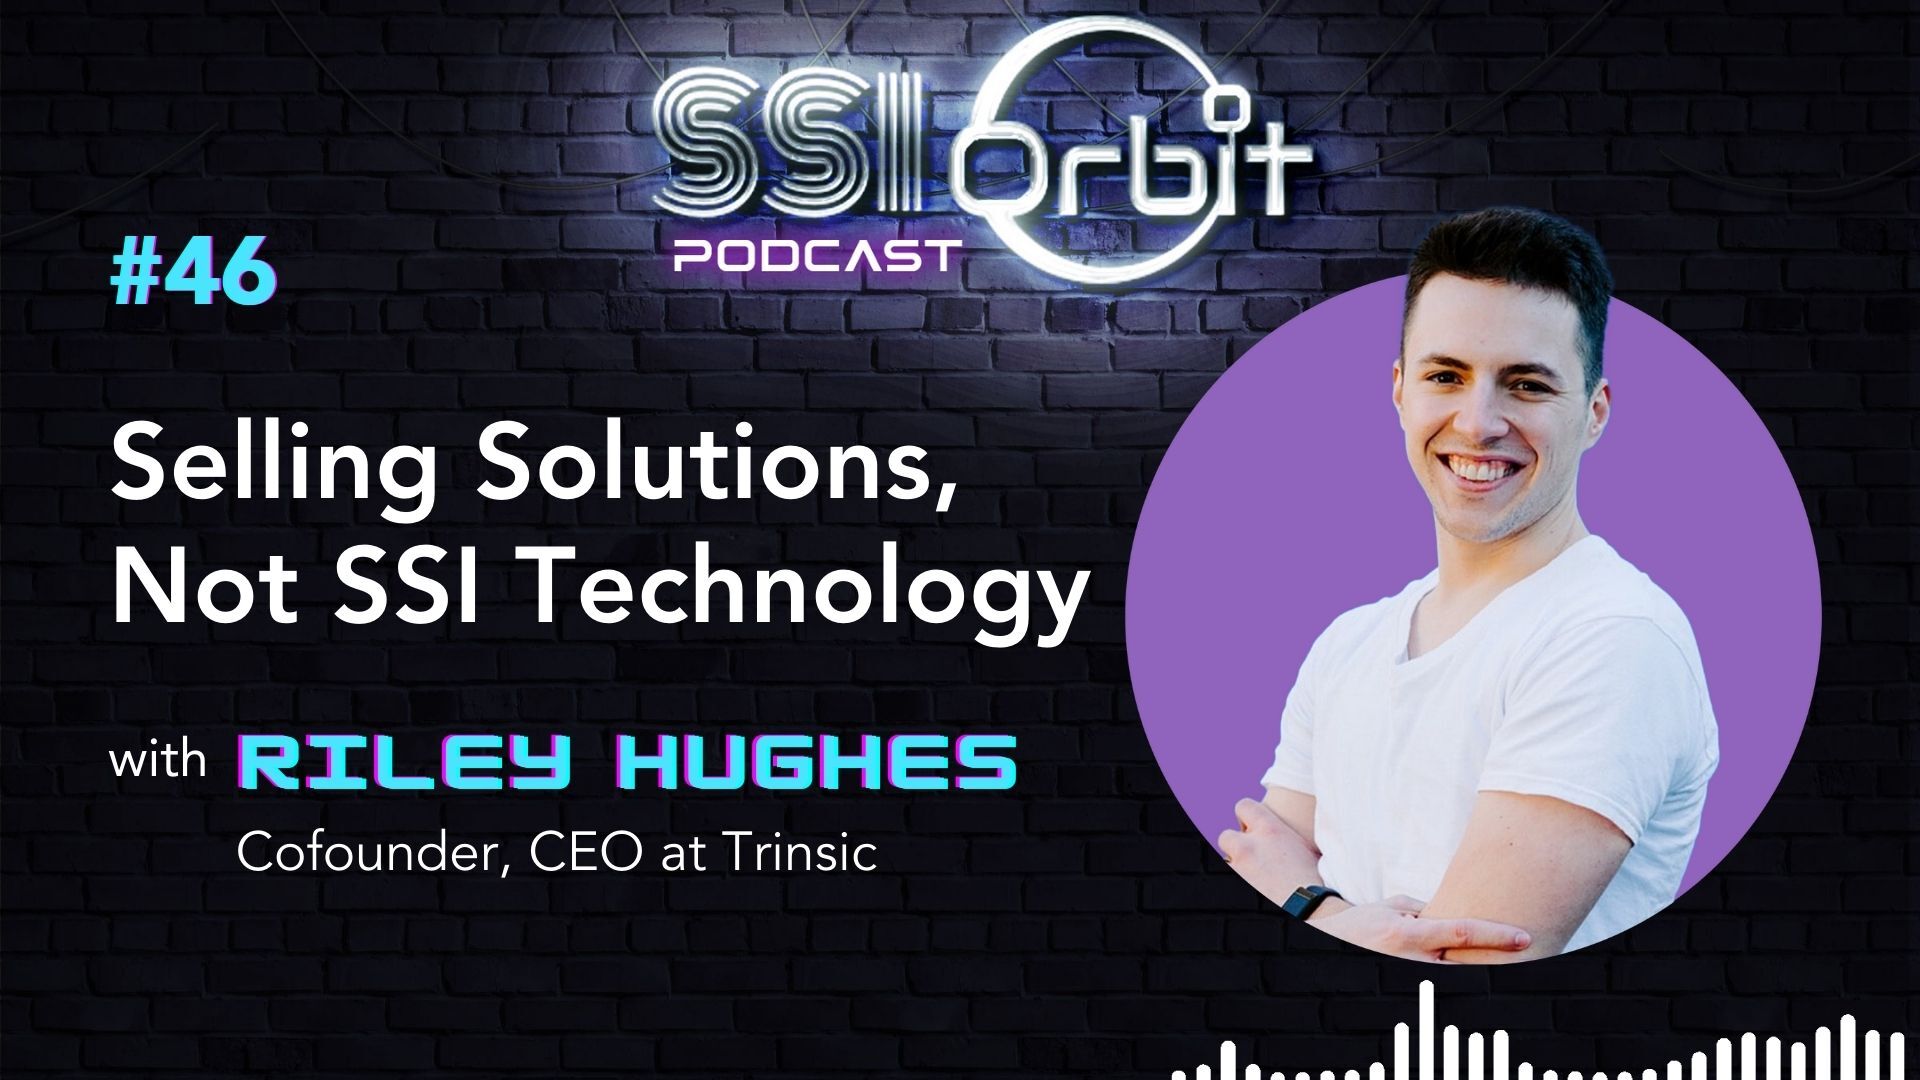 Selling Solutions, Not SSI Technology (with Riley Hughes)